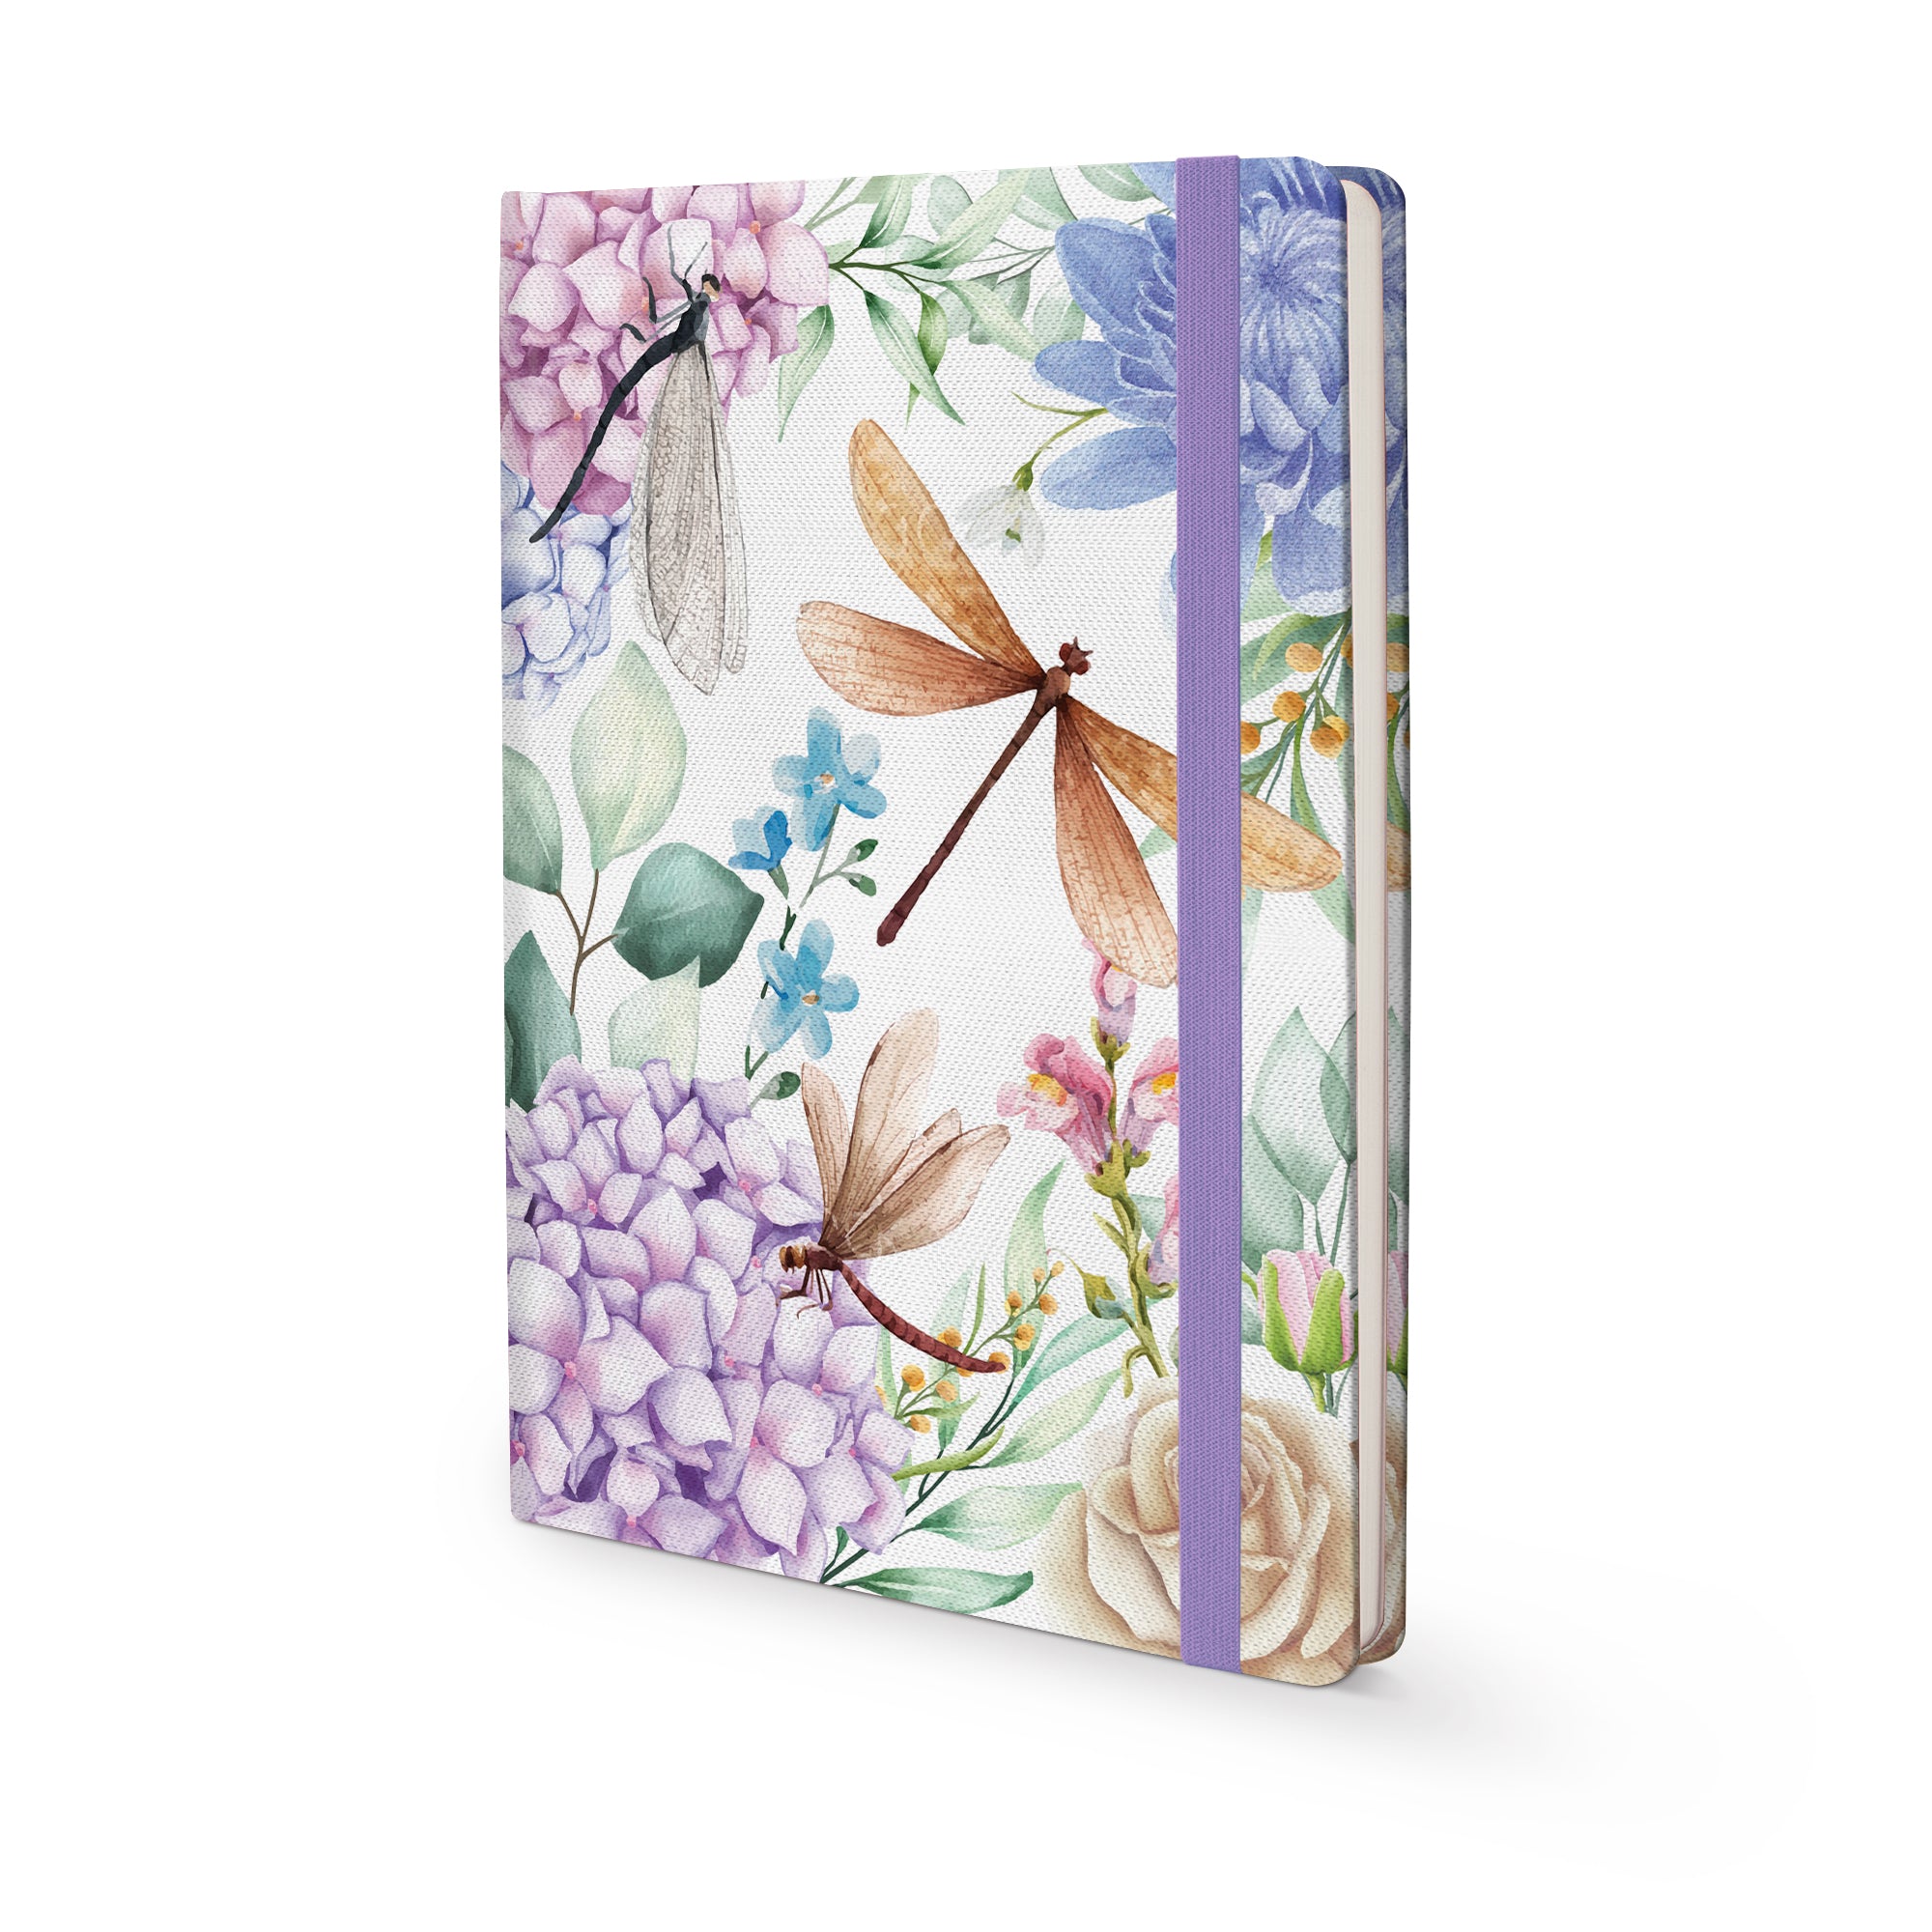 Image shows a dragonflies journal